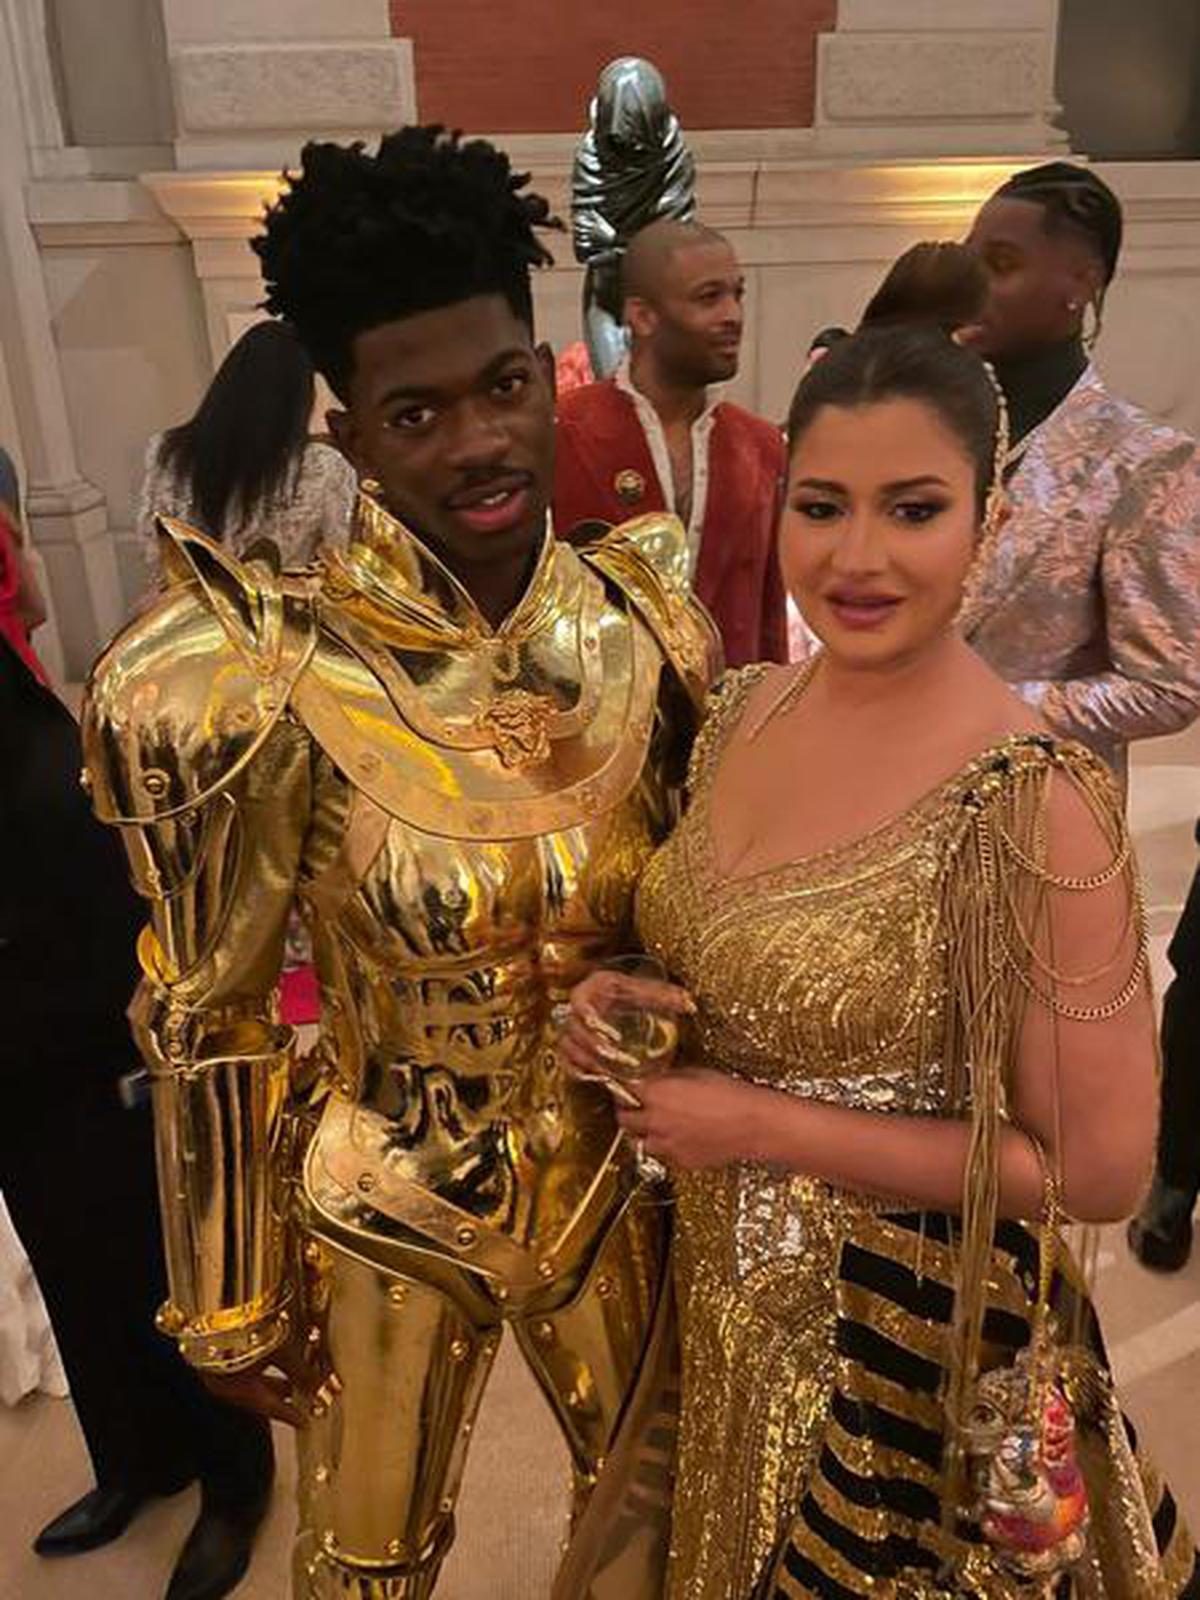 Sudha Reddy with musician Lil Nas X at the 2021 Met Gala in New York City on September 13.